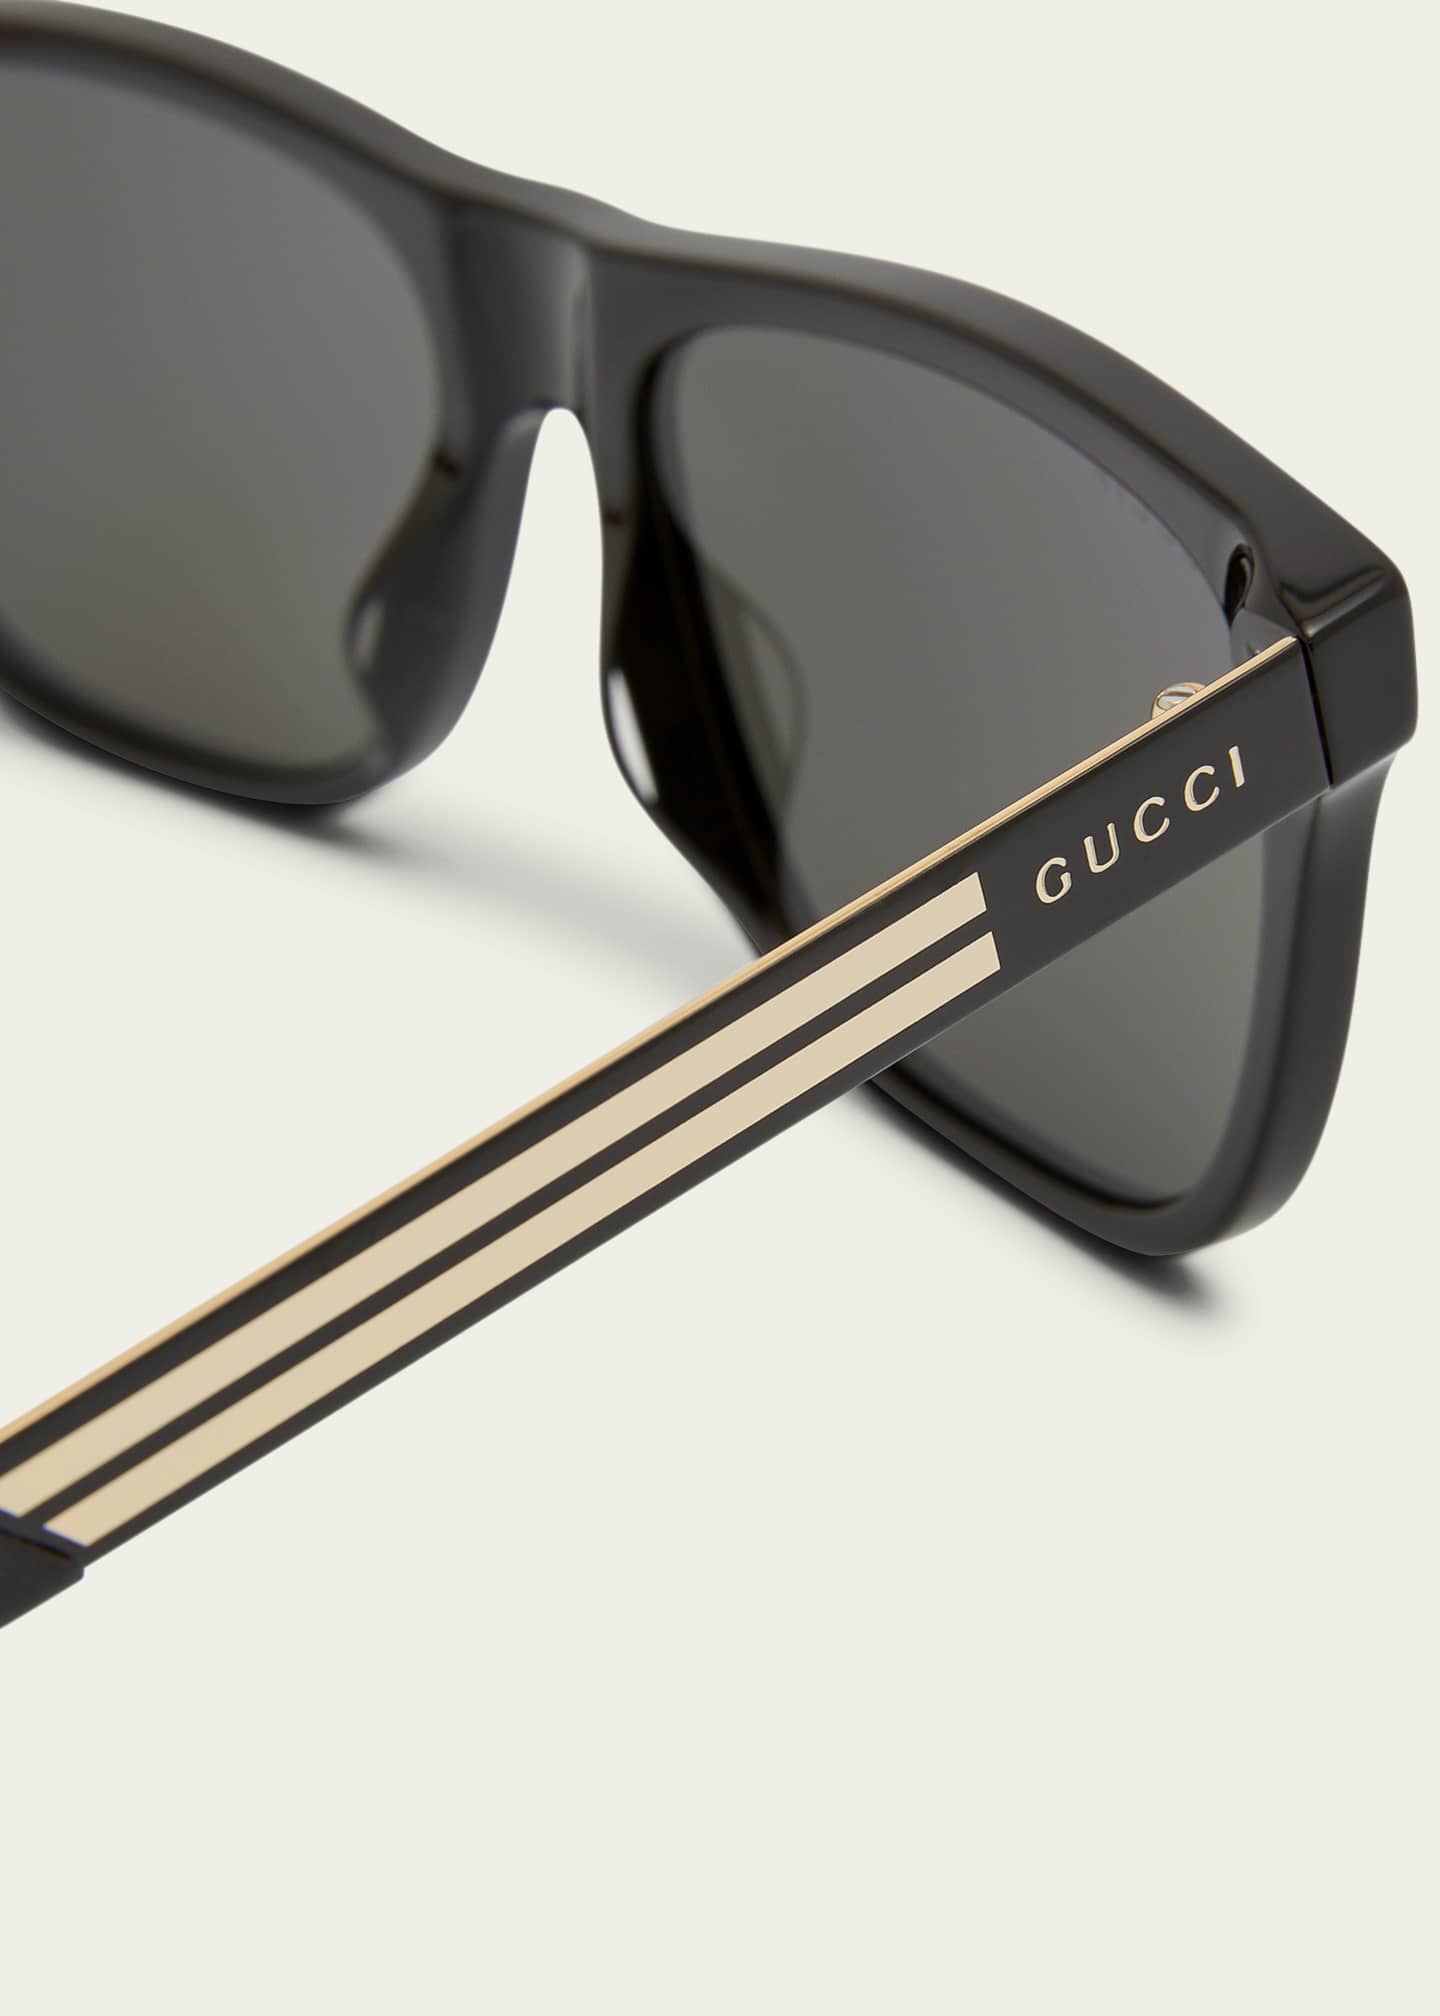 Gucci: shoes, bags, belts, sweaters to sunglasses - The brand - CM